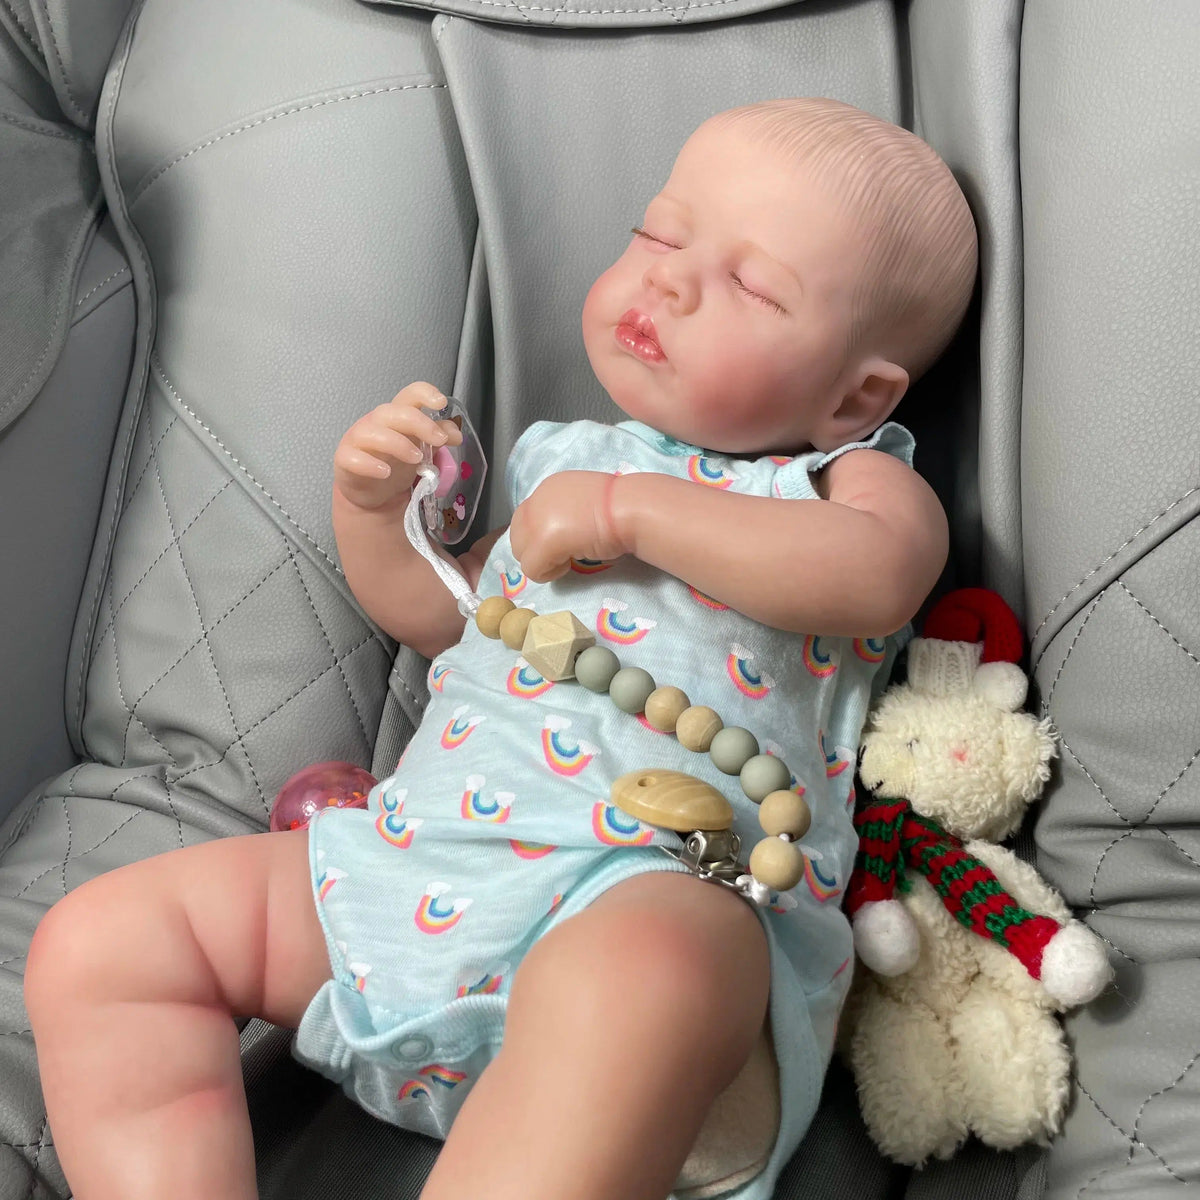 New 50CM Reborn Baby Dolls LouLou Lifelike Silicone Vinyl Newborn 3D Skin Visible Veins DIY Toys Christmas Gift For Girls-Maternity Miracles - Mom & Baby Gifts